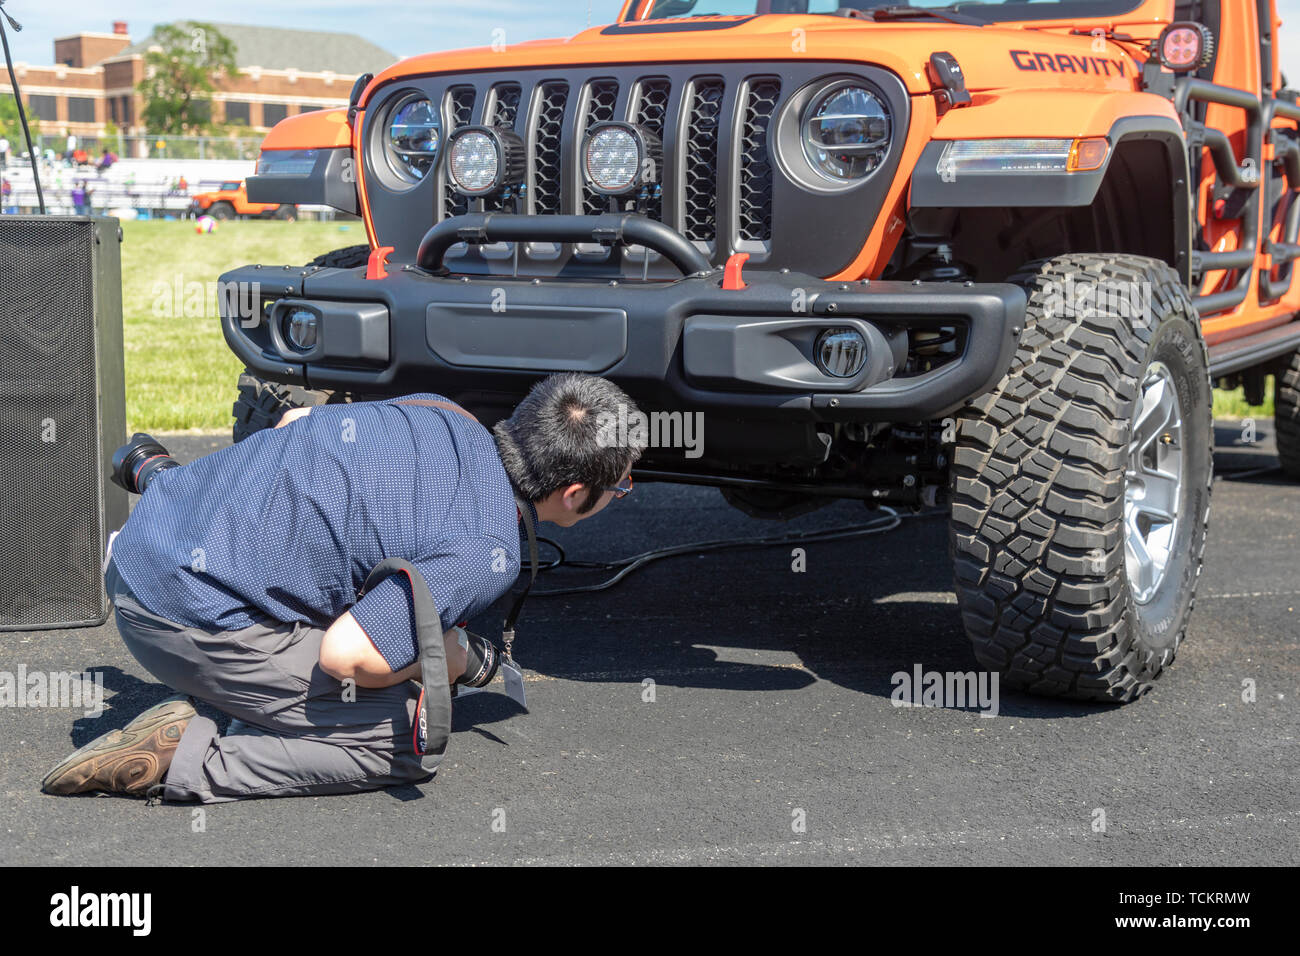 Detroit, Michigan - A photographer inspects a Jeep Gladiator Gravity concept vehicle on display at a community celebration marking the beginning of co Stock Photo